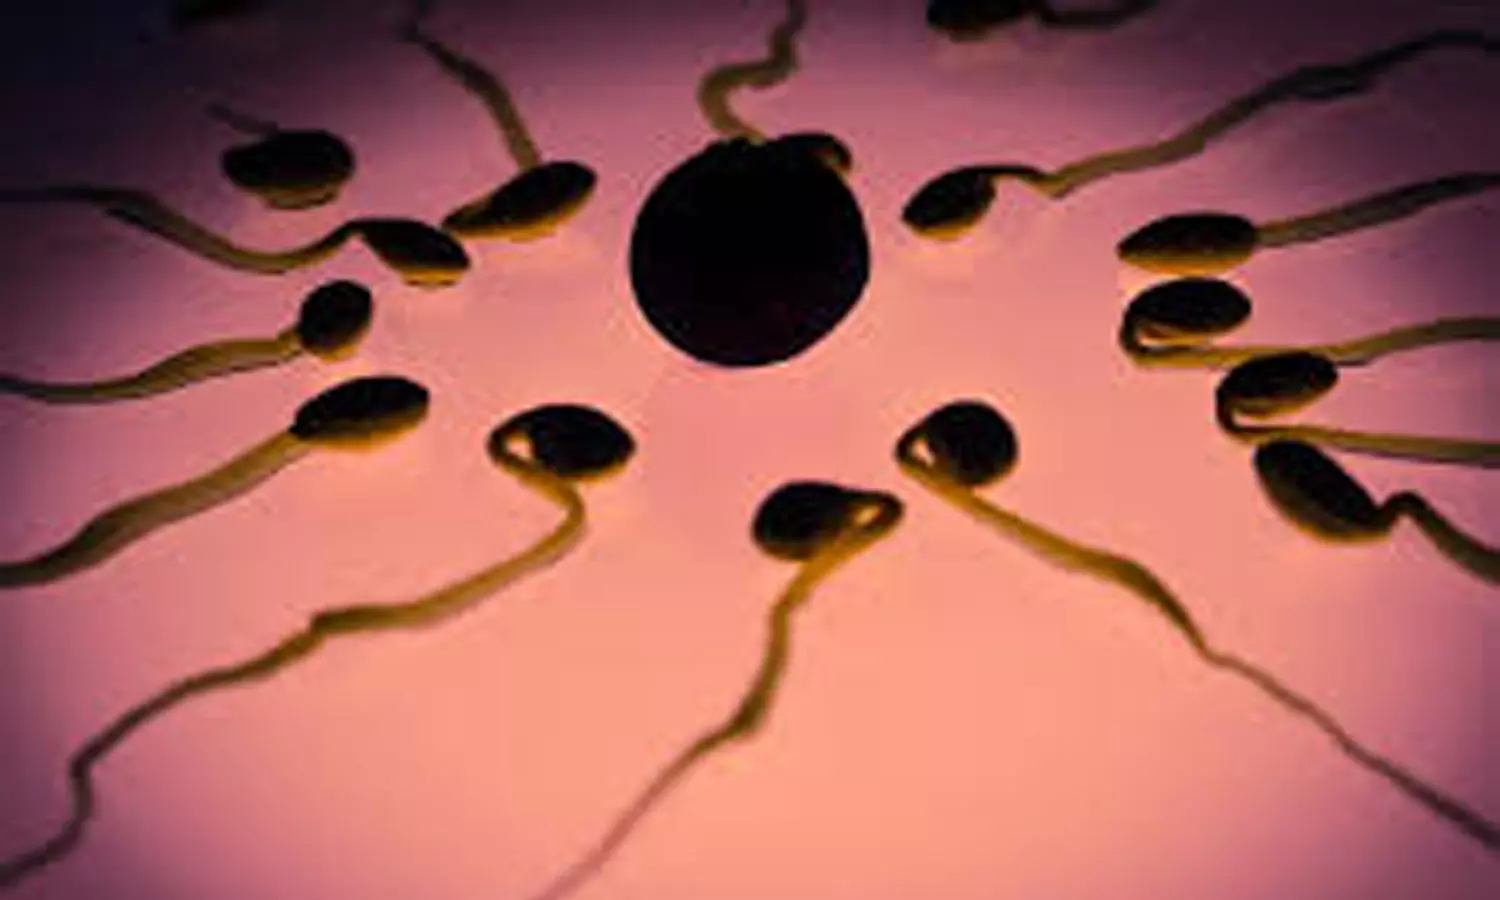 Post wash total sperm count rate Improves conception by Assisted reproduction techniques: Study